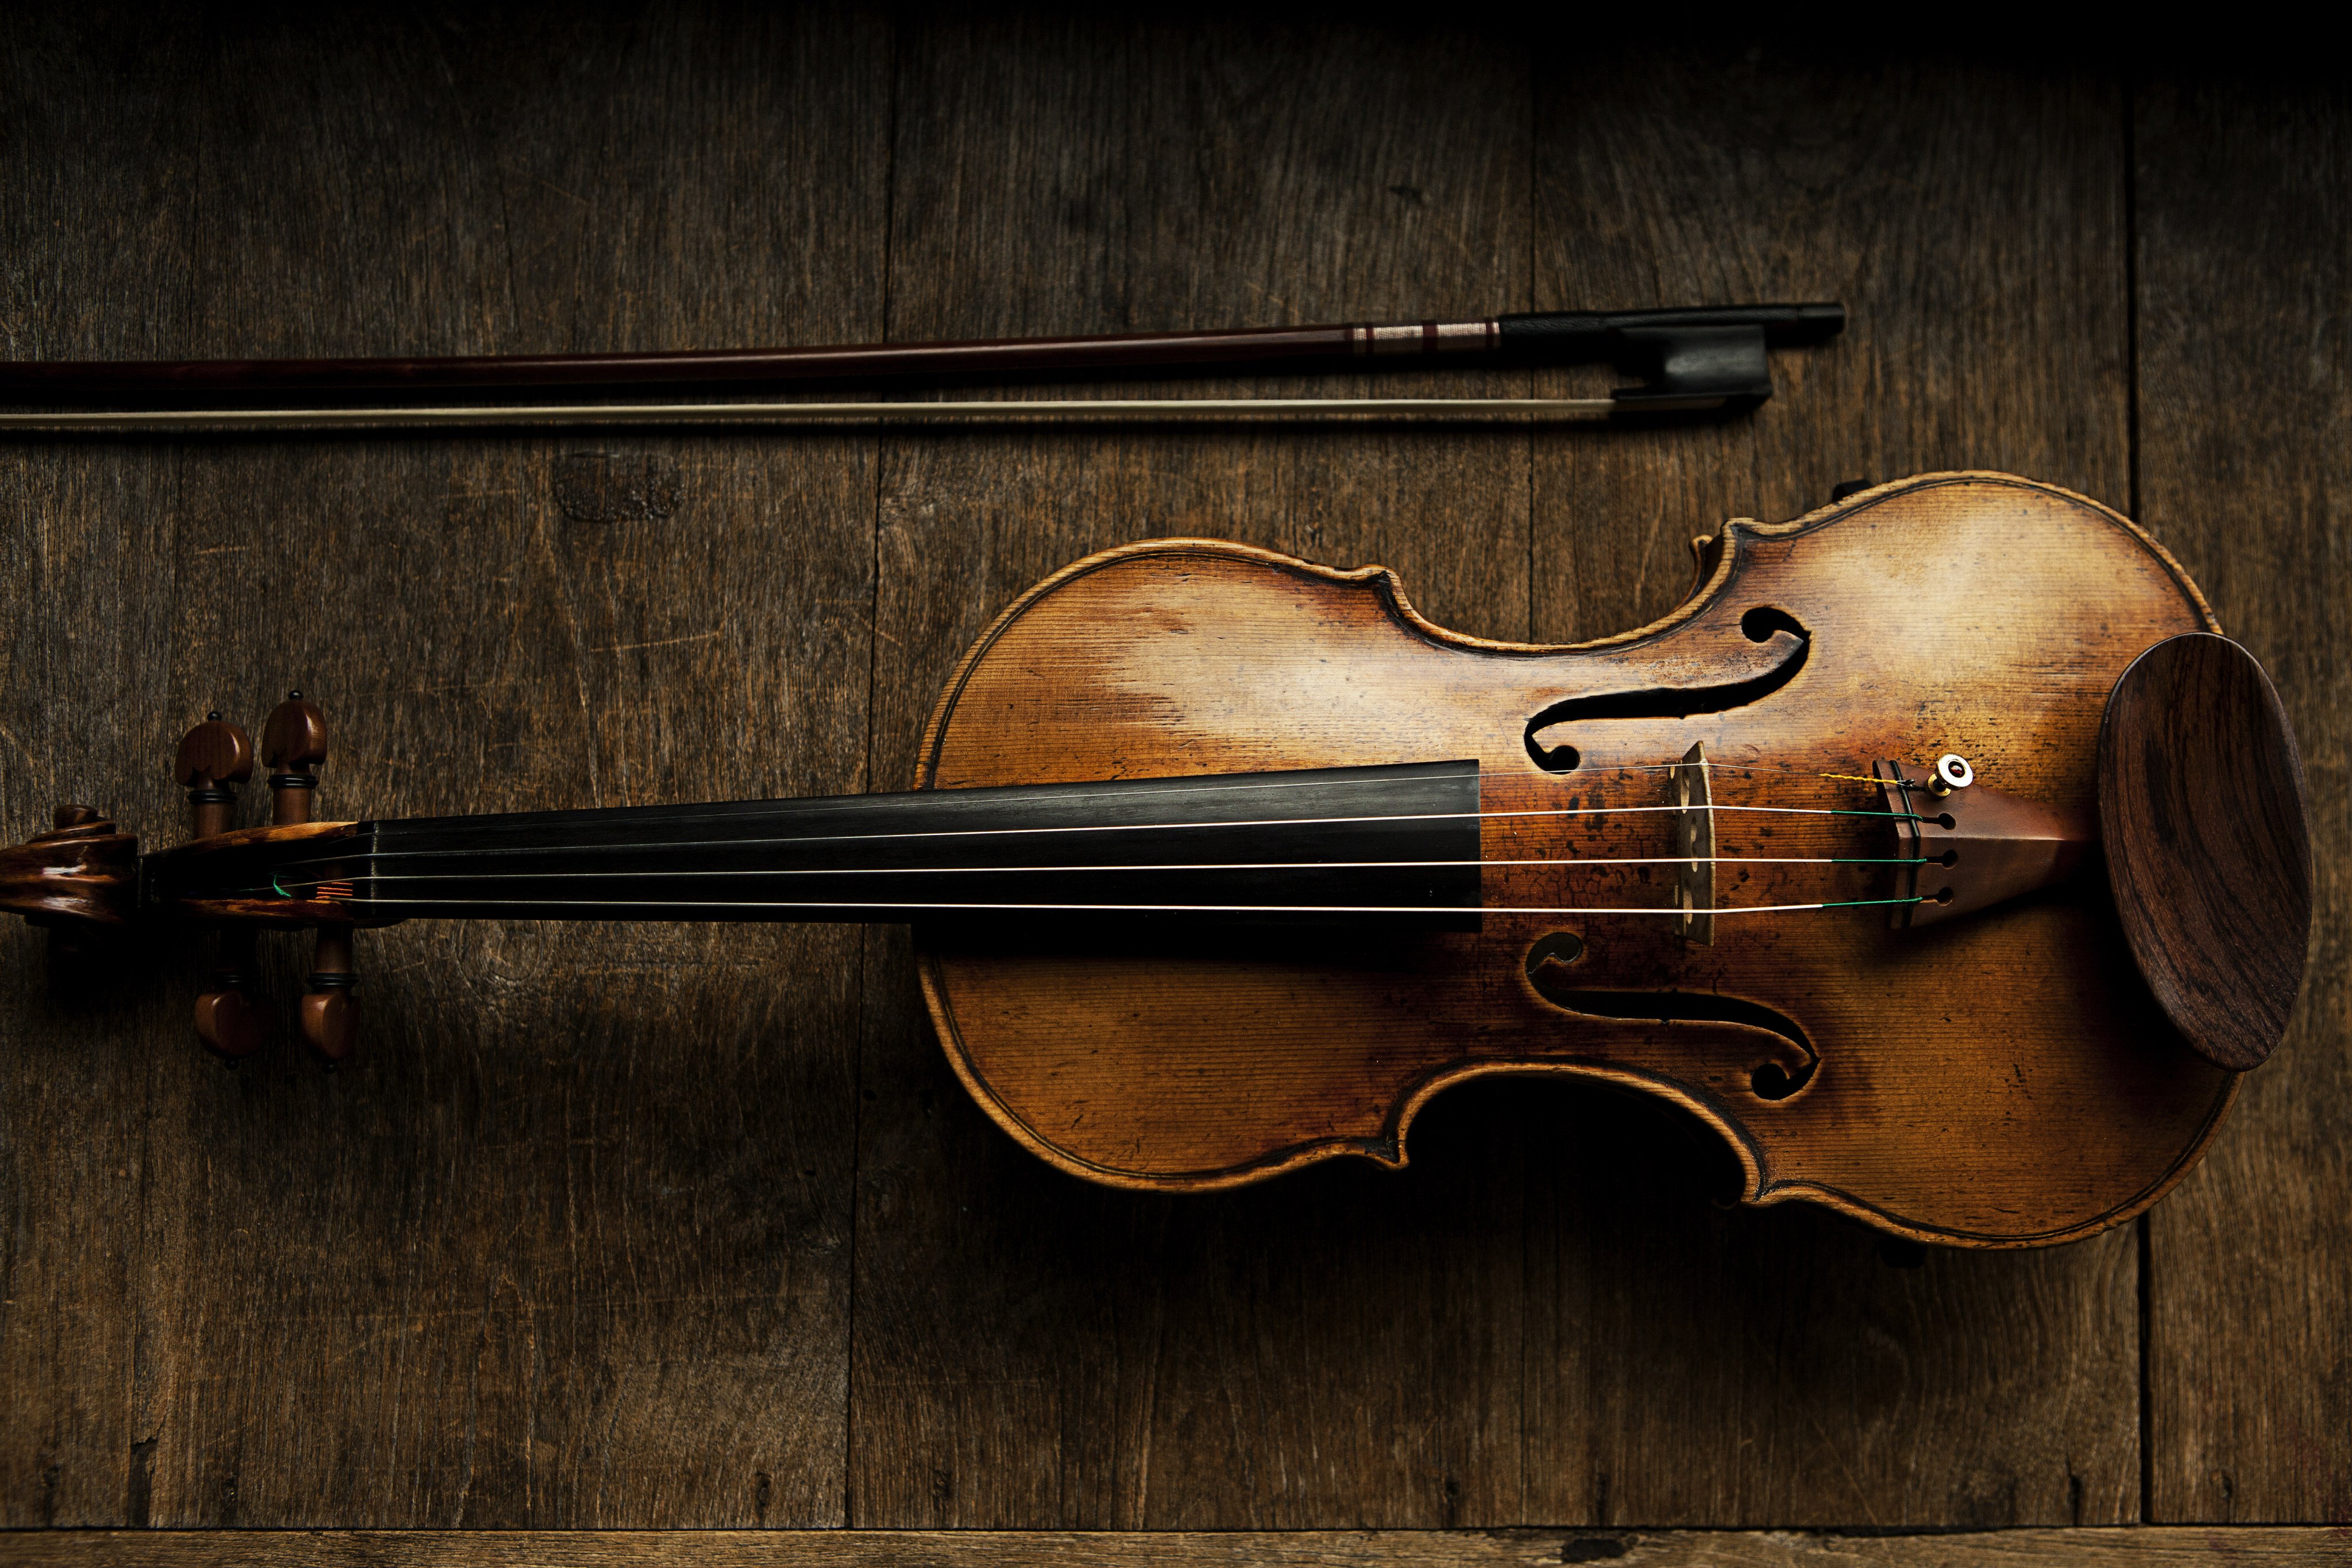 The storied “ex-Bazzini, ex-Soldat” violin crafted by Joseph Guarneri “del Gesu” in 1742, currently on a lifetime loan to American musician Rachel Barton Pine. Photo: Lisa Marie Mazzucco